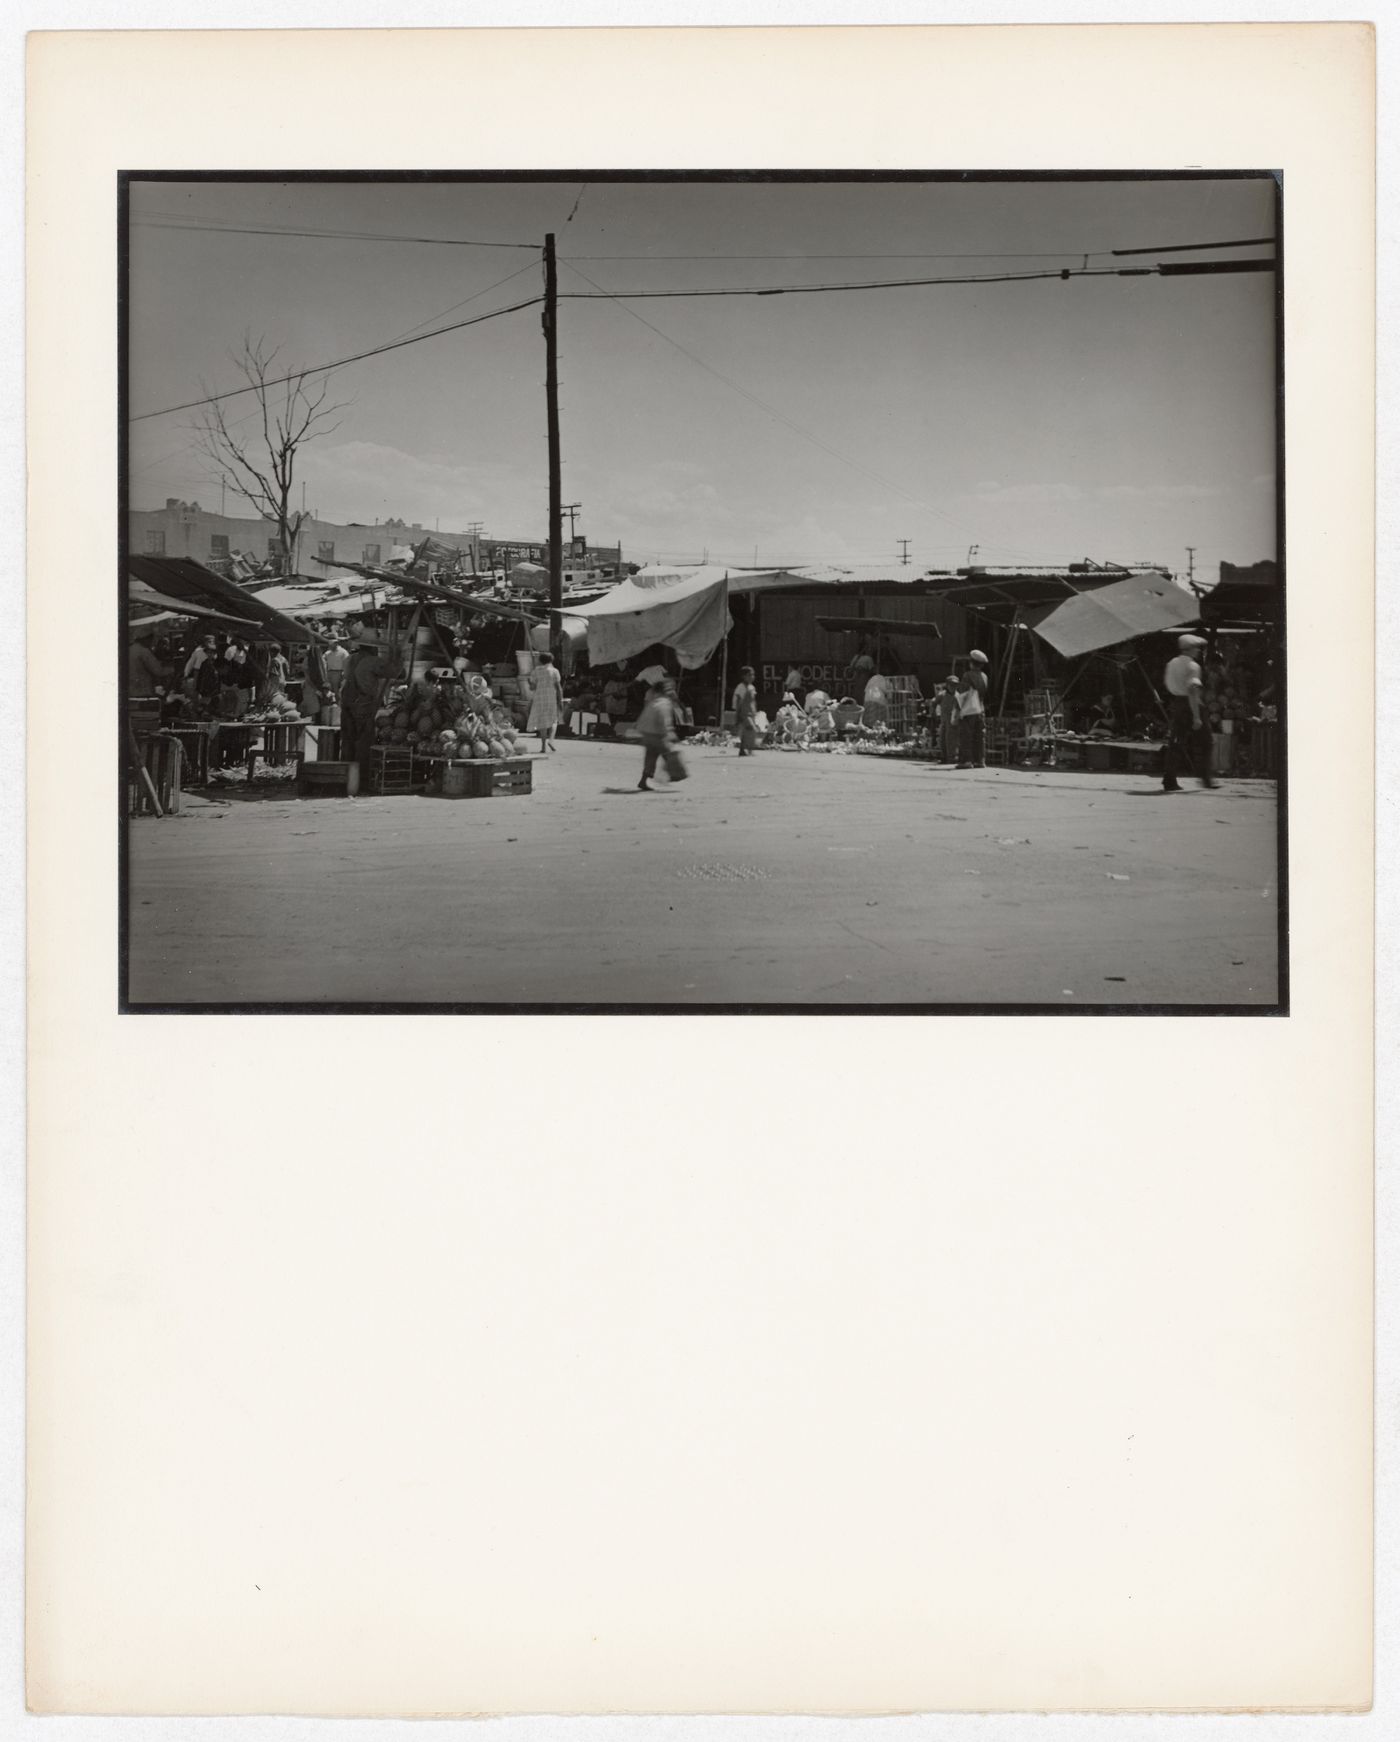 View of a market, Mexico